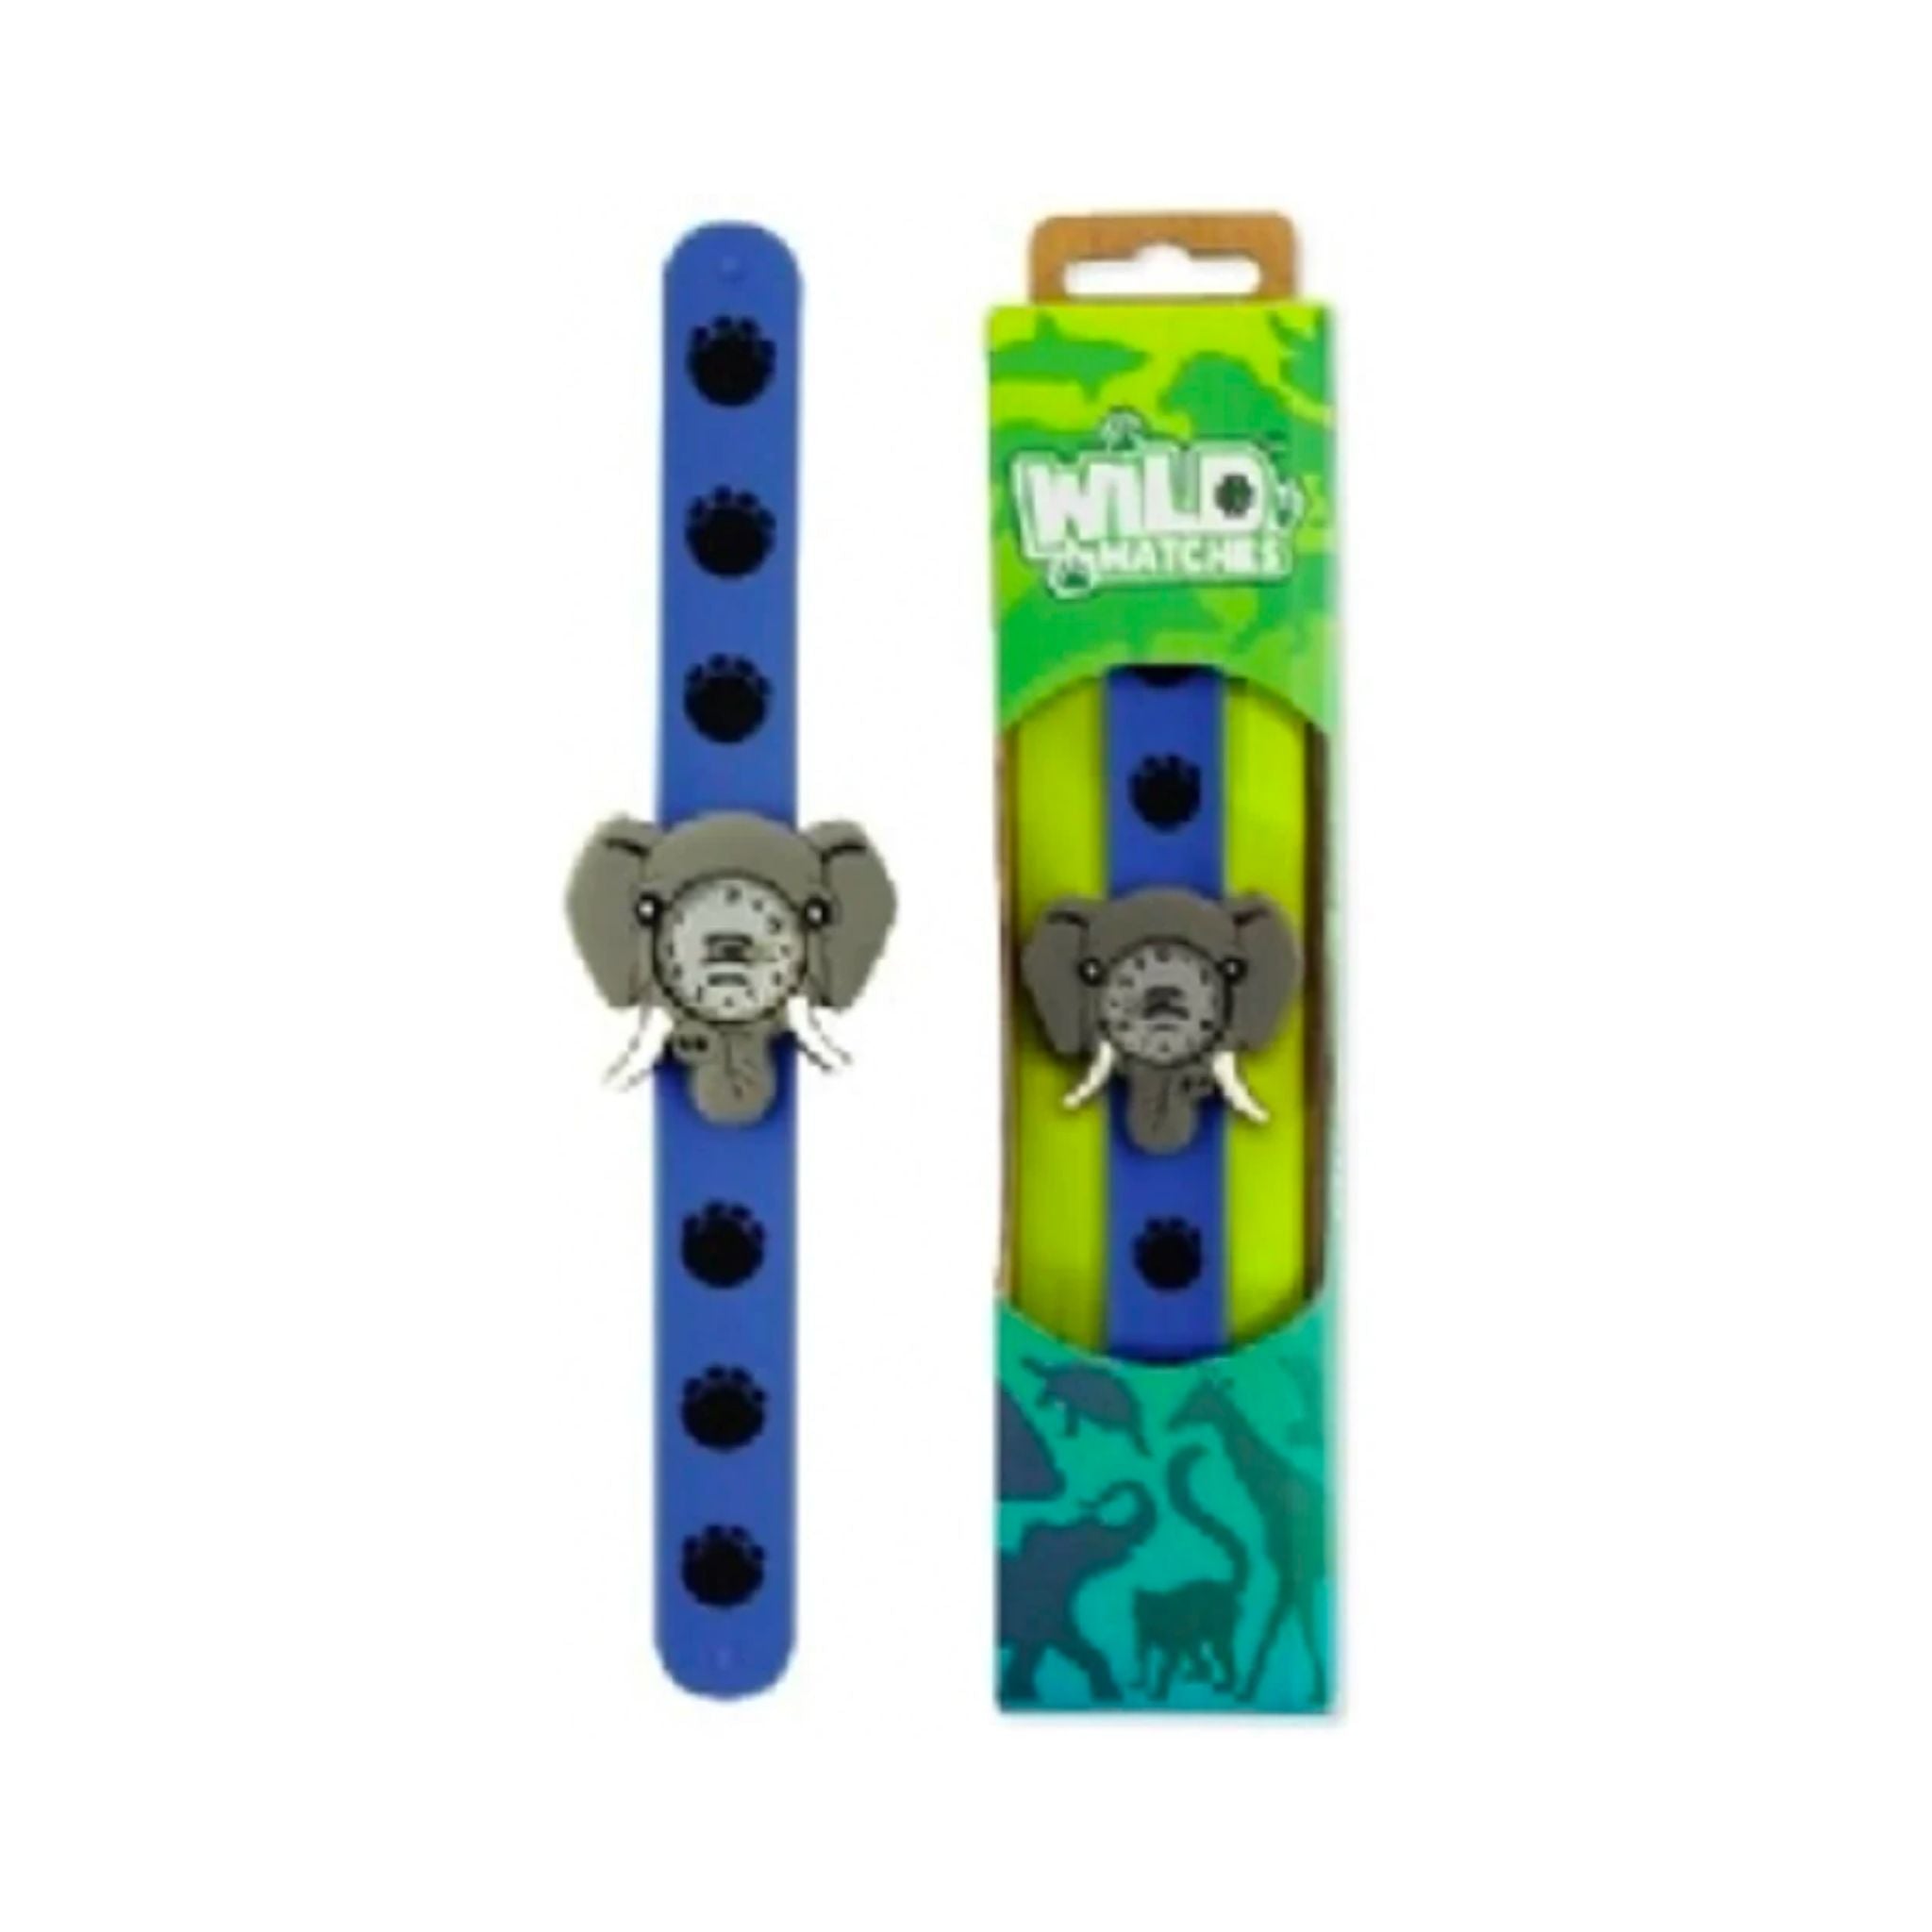 Wild Watches Elephant Snap Band Watch